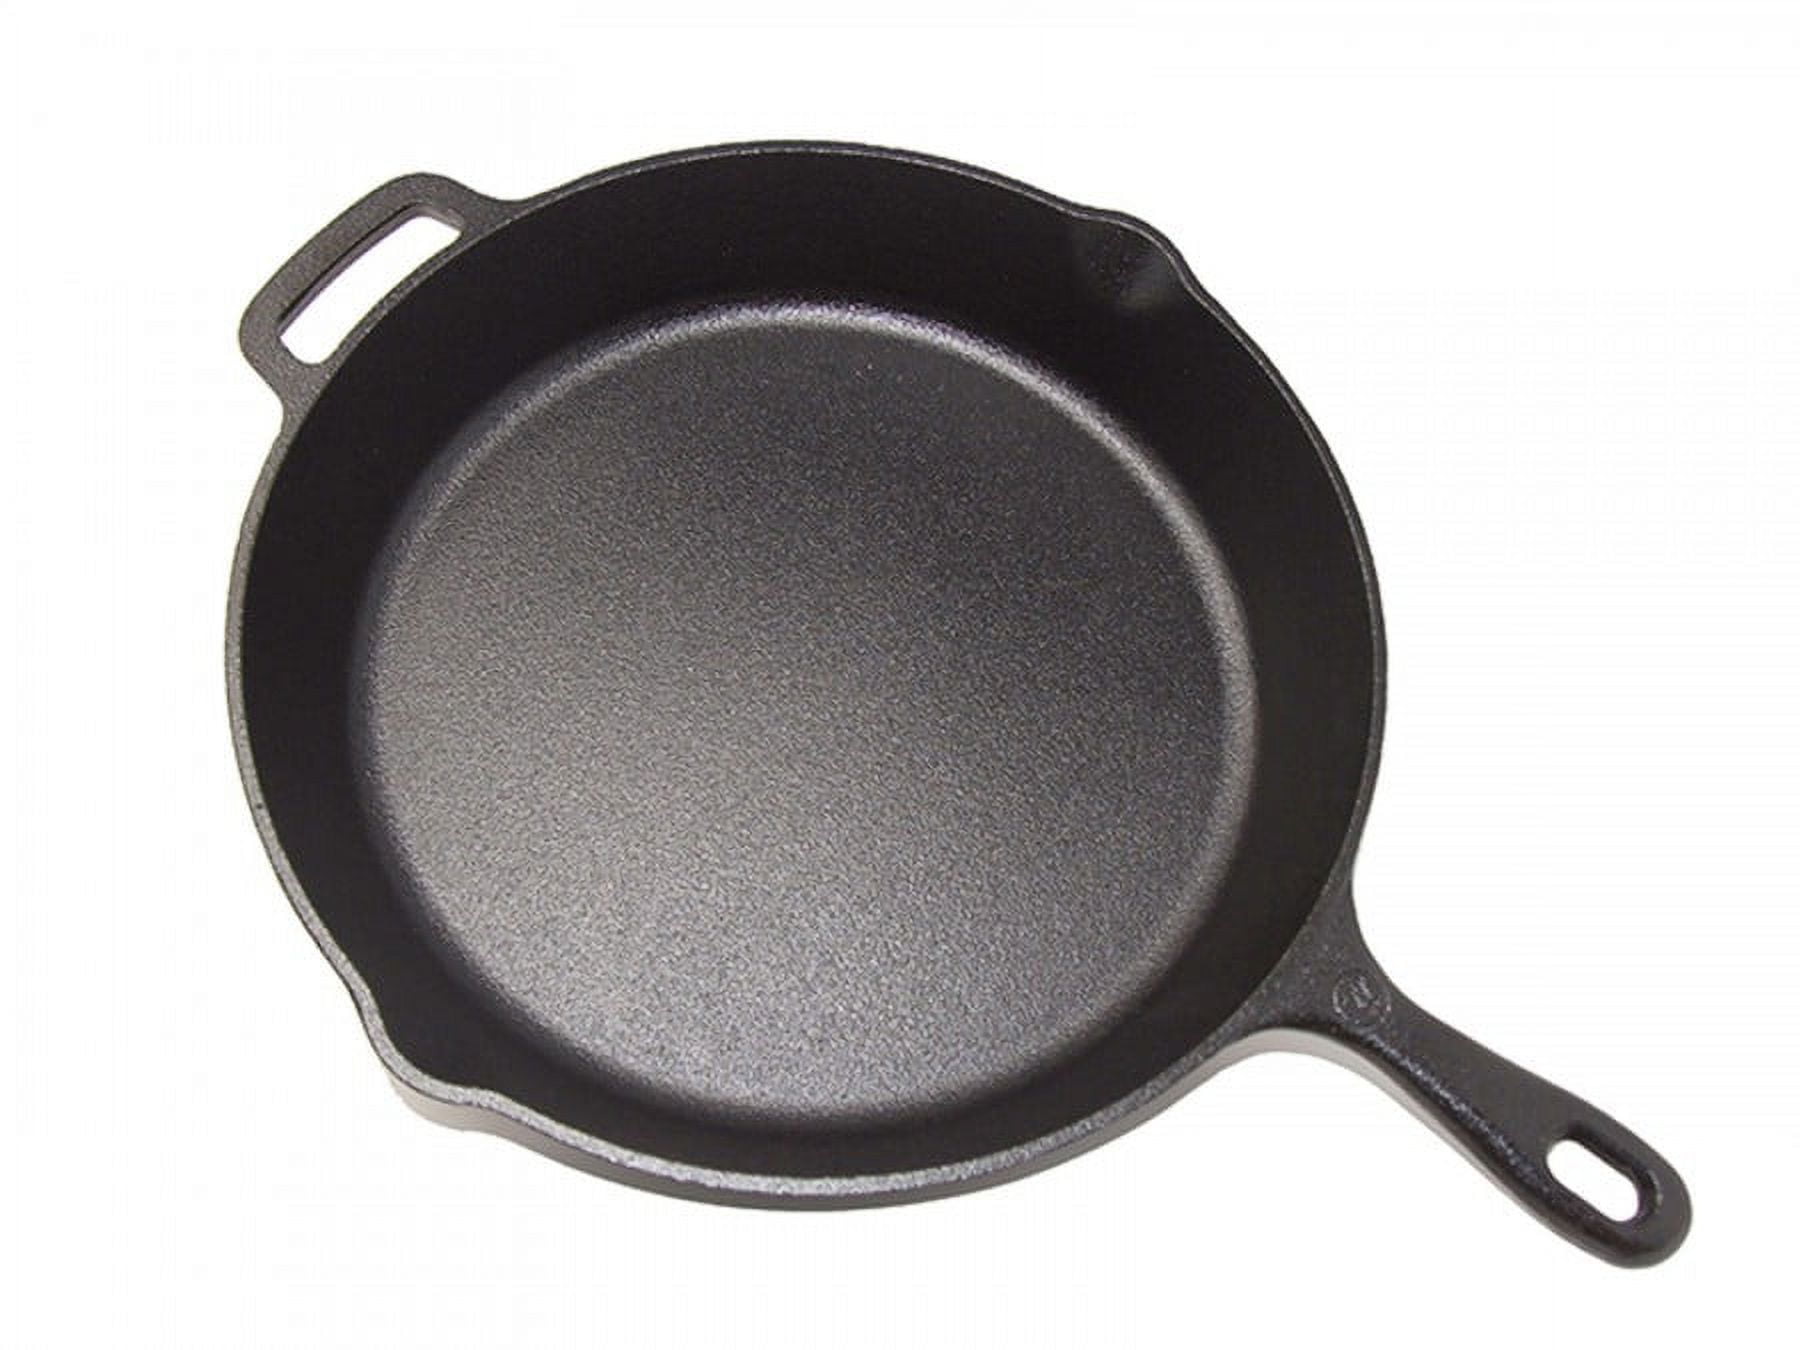 Westinghouse Square Frypan 2000W with Cast in Element –